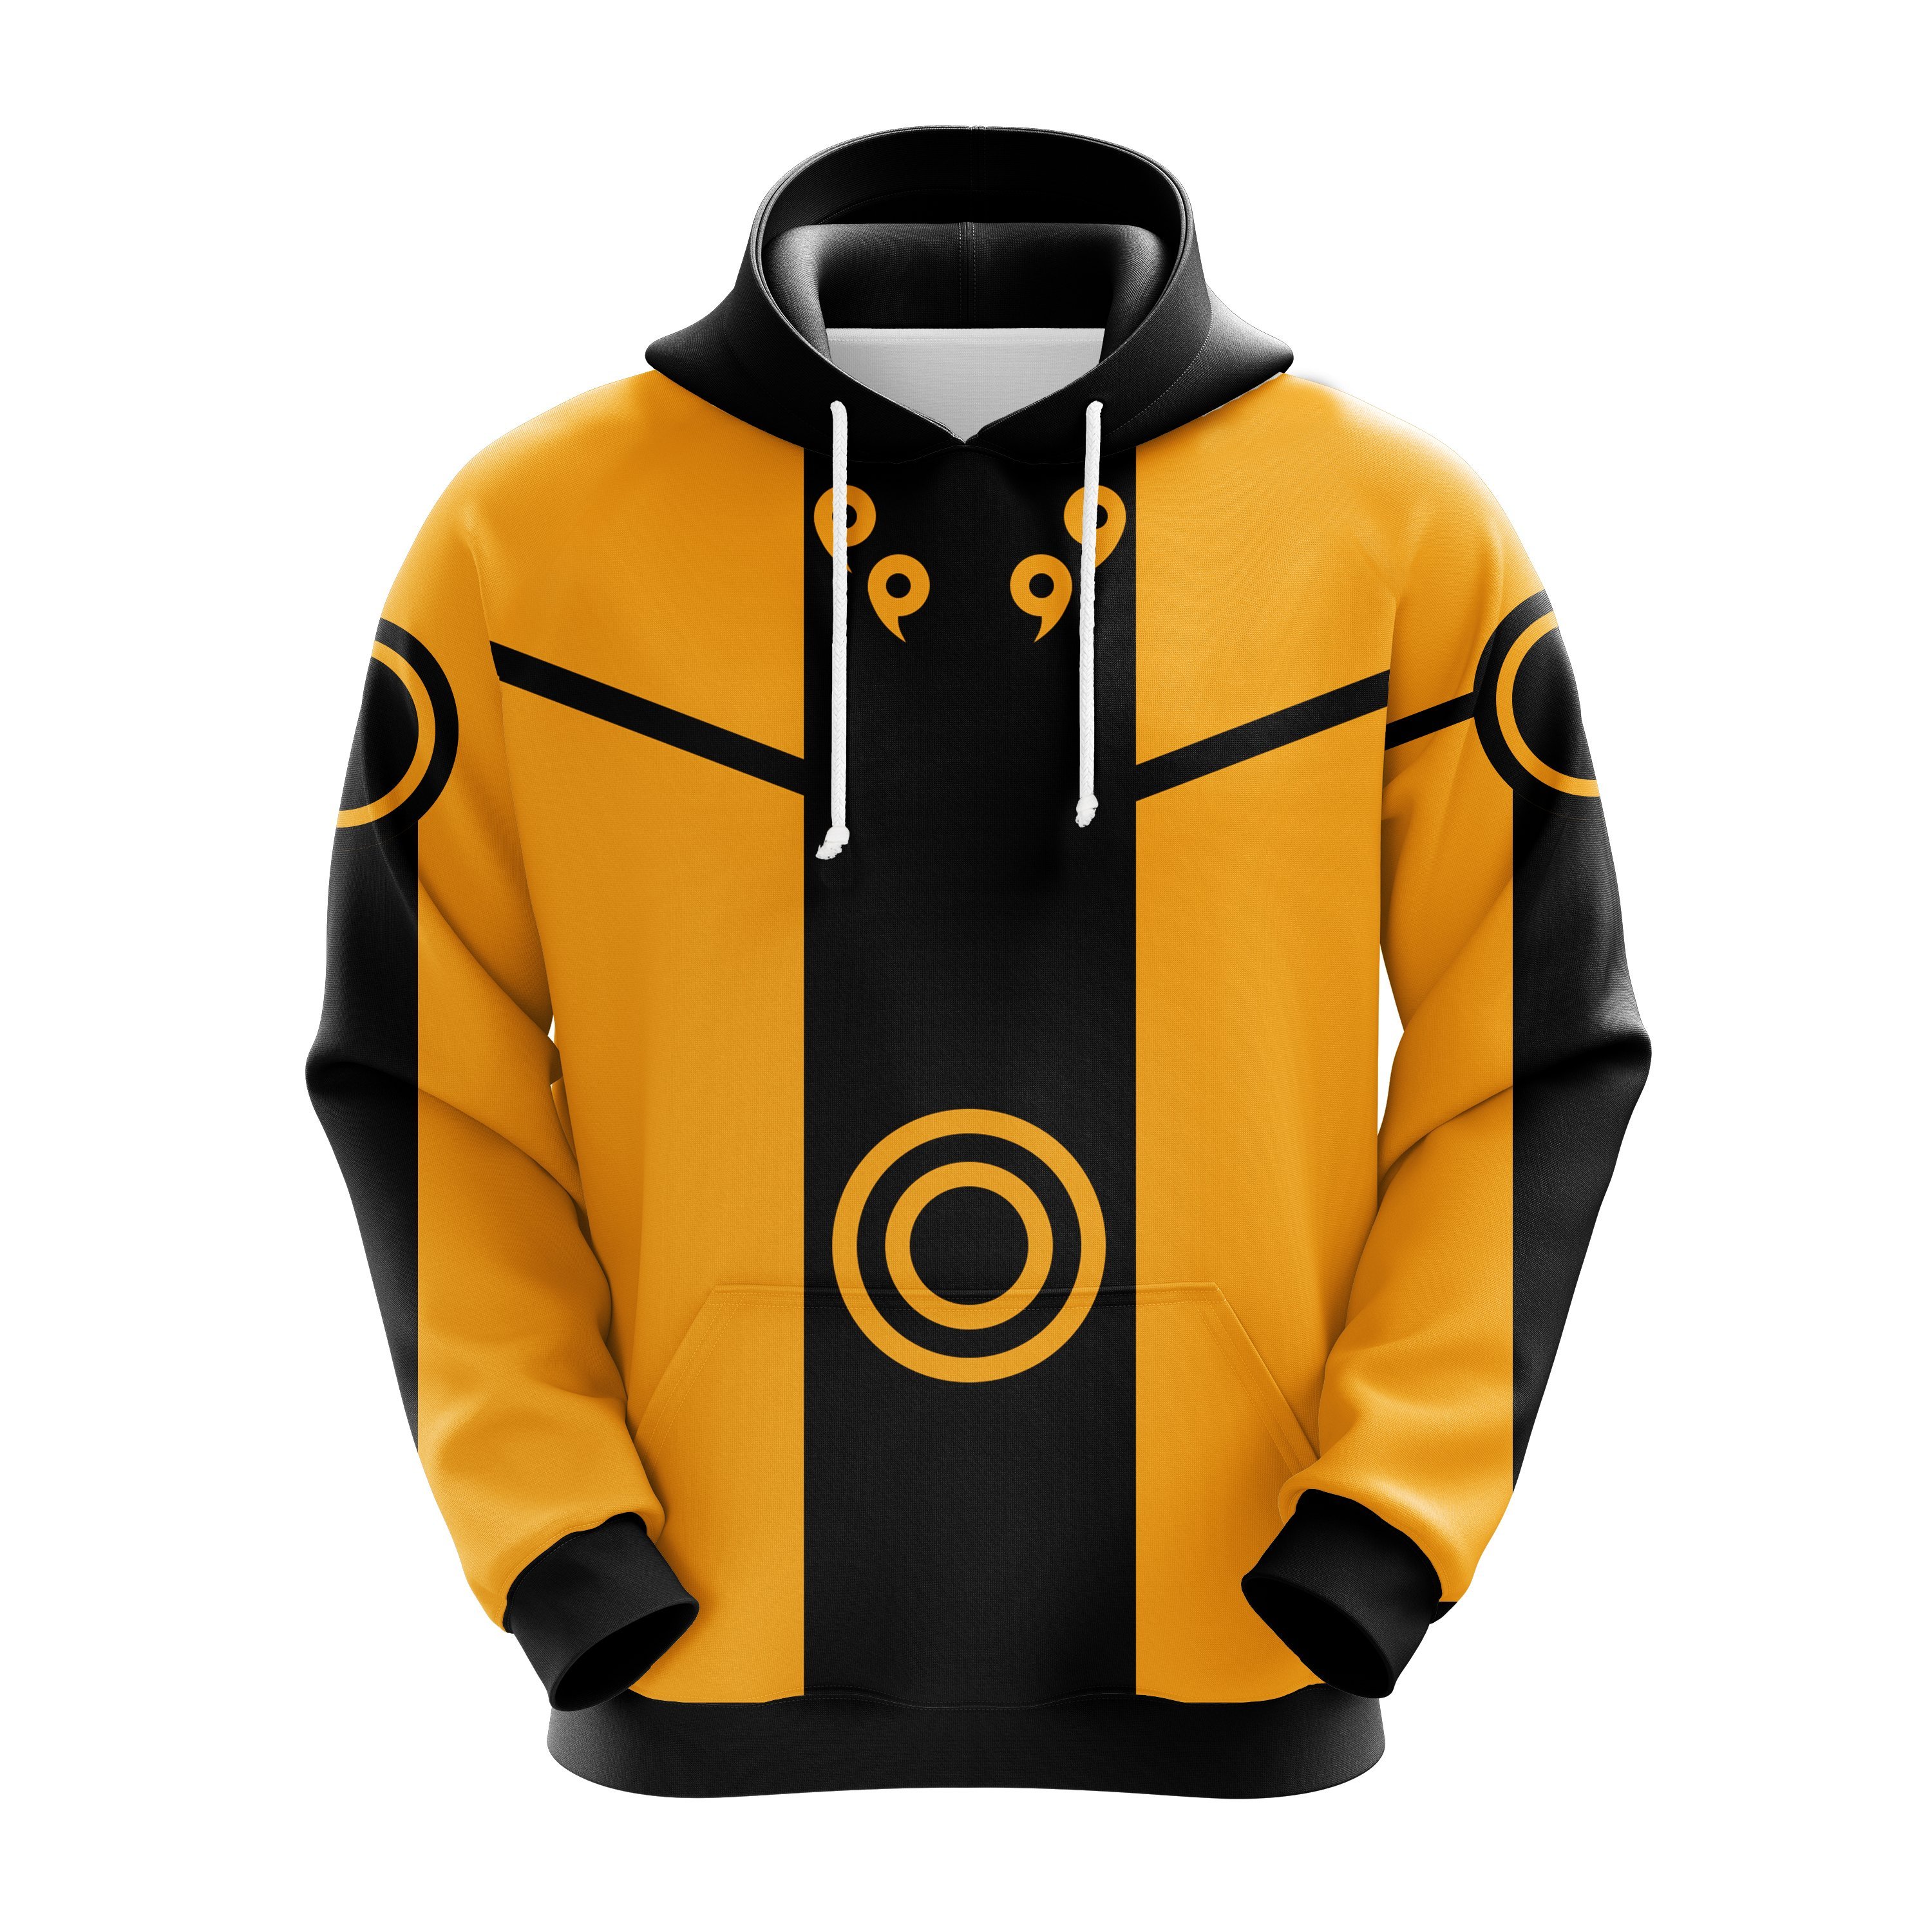 Naruto 6 Path Anime Cosplay Outfit Hoodie Amazing Gift Idea – Sothwarm